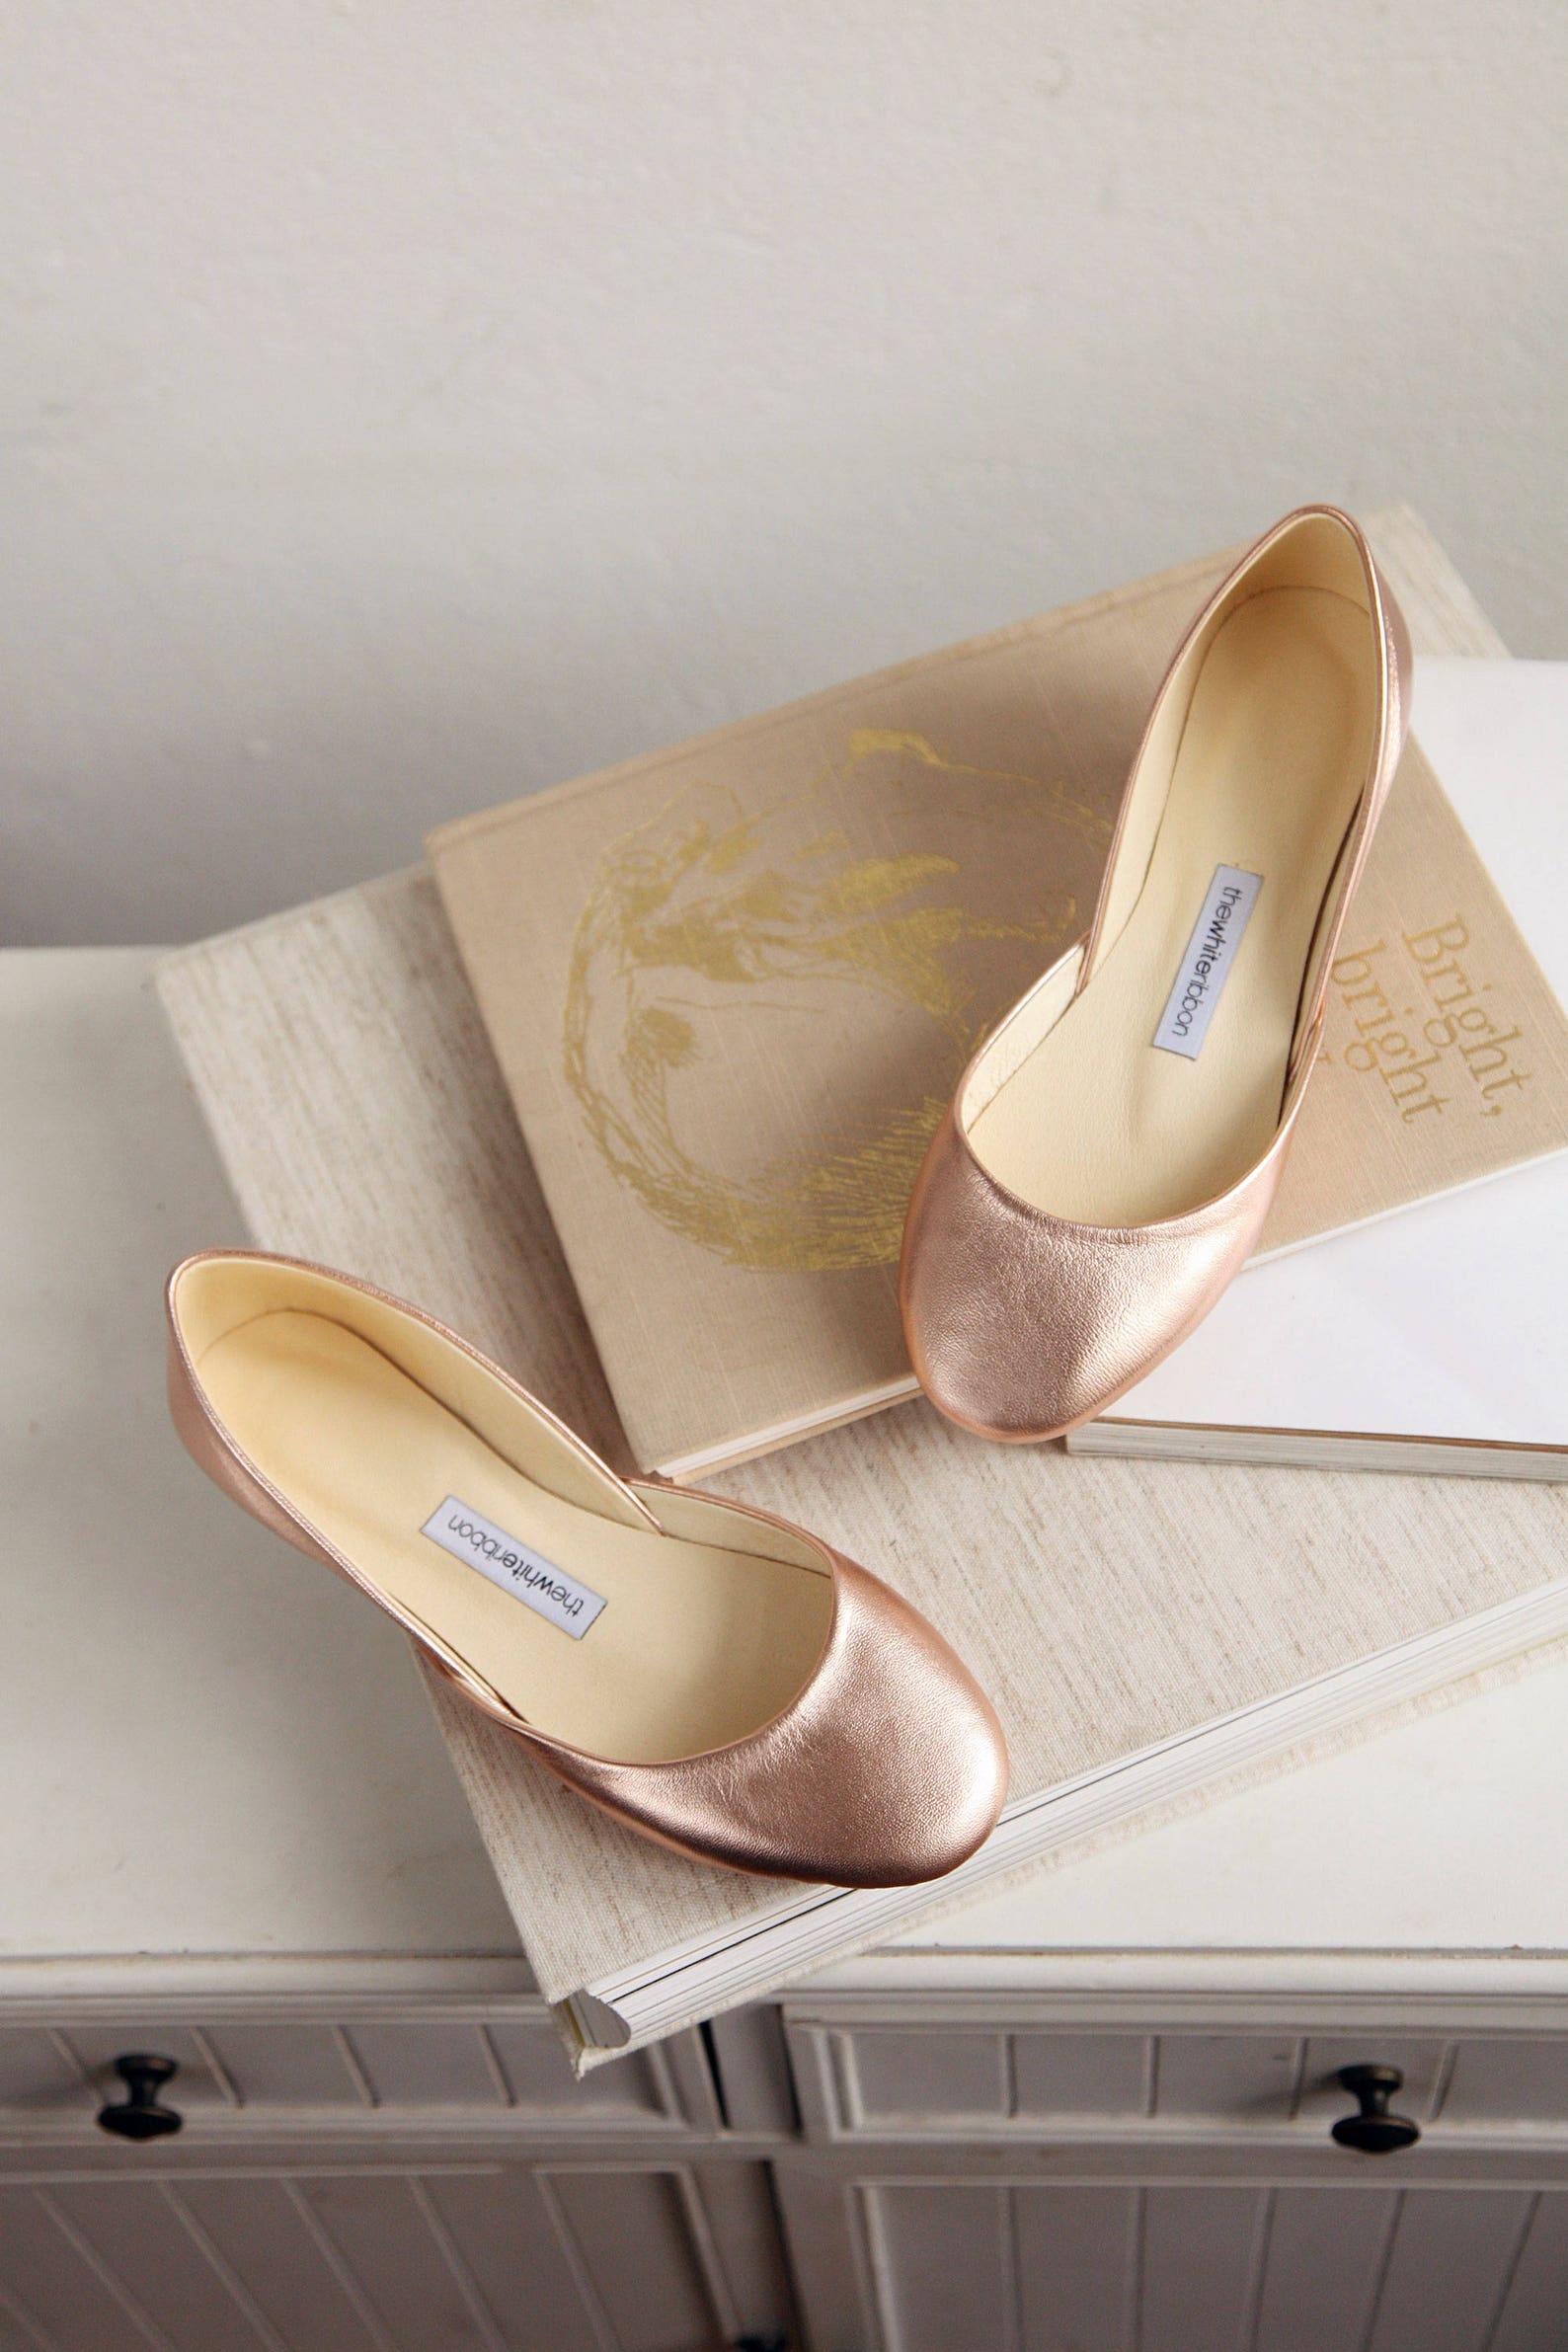 metallic rose gold ballet flats | bridal wedding shoes | pointe style shoes | classic model | standard width | rose gold | ready